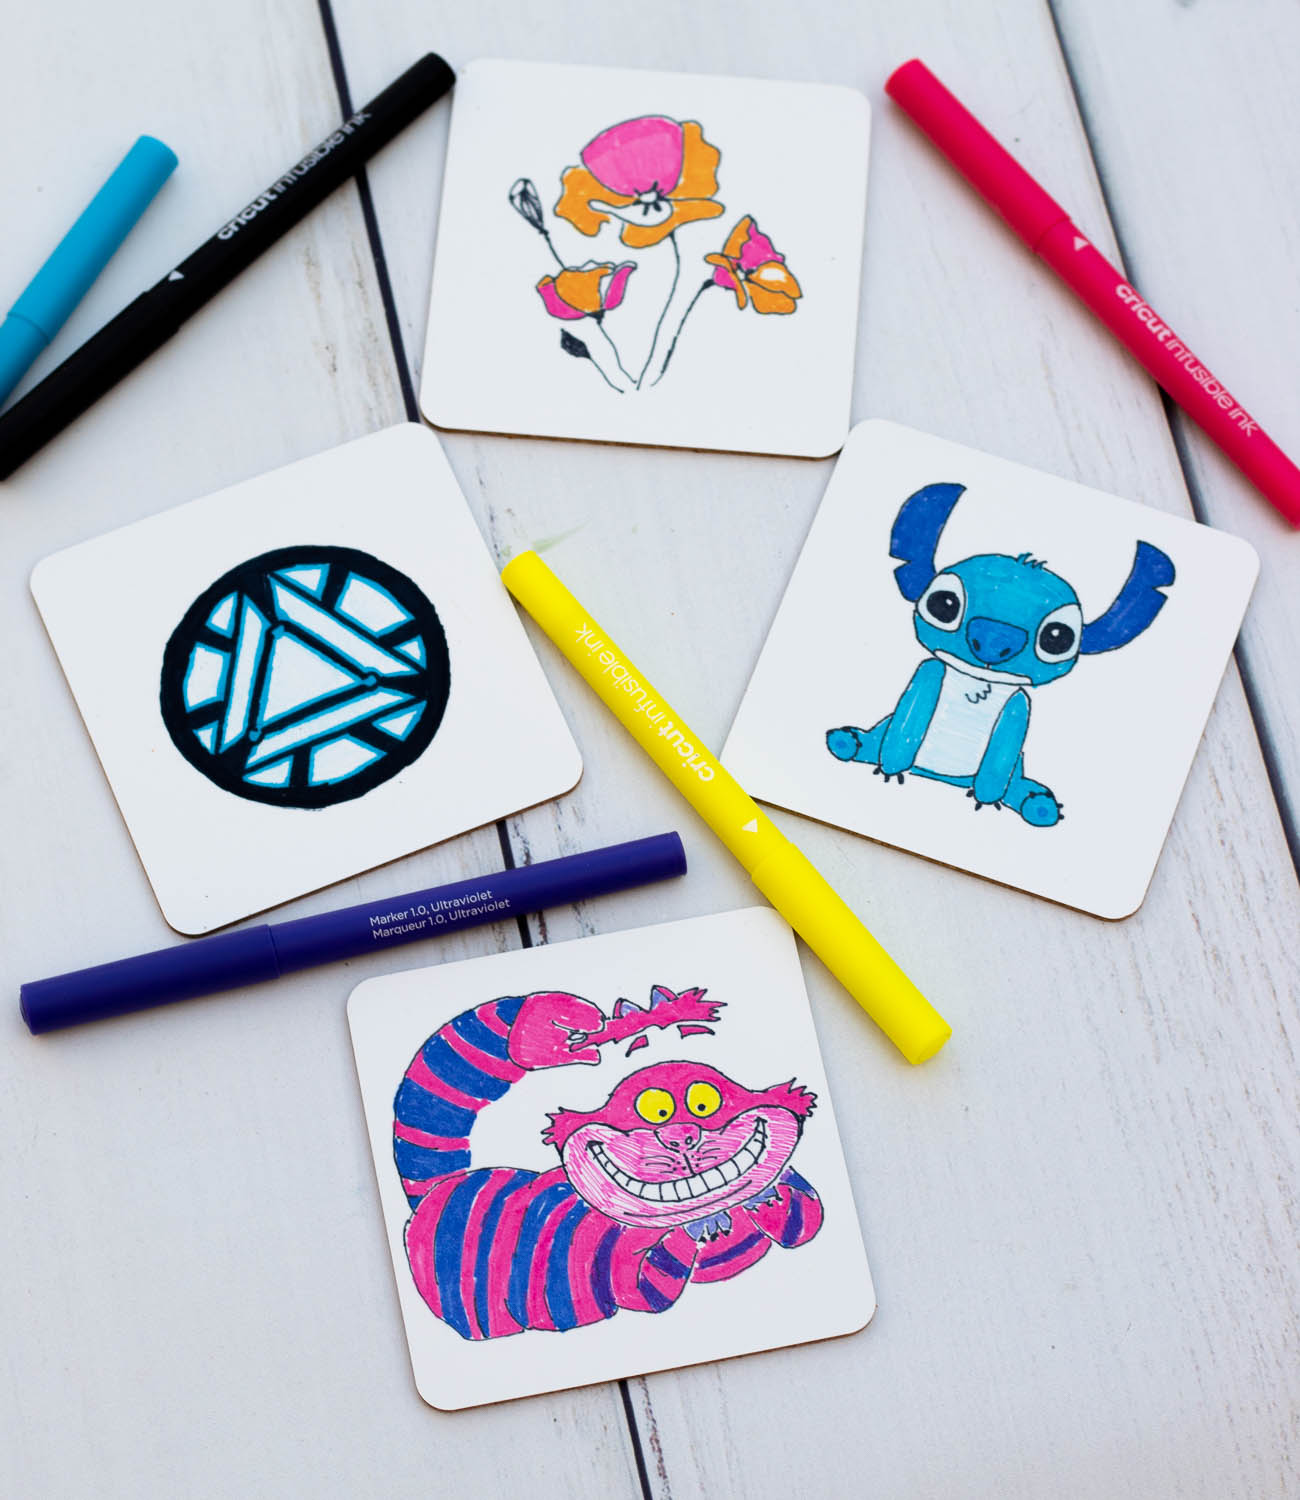 Infusible Ink Markers Cricut Project Using Kid's Drawings! - Leap of Faith  Crafting